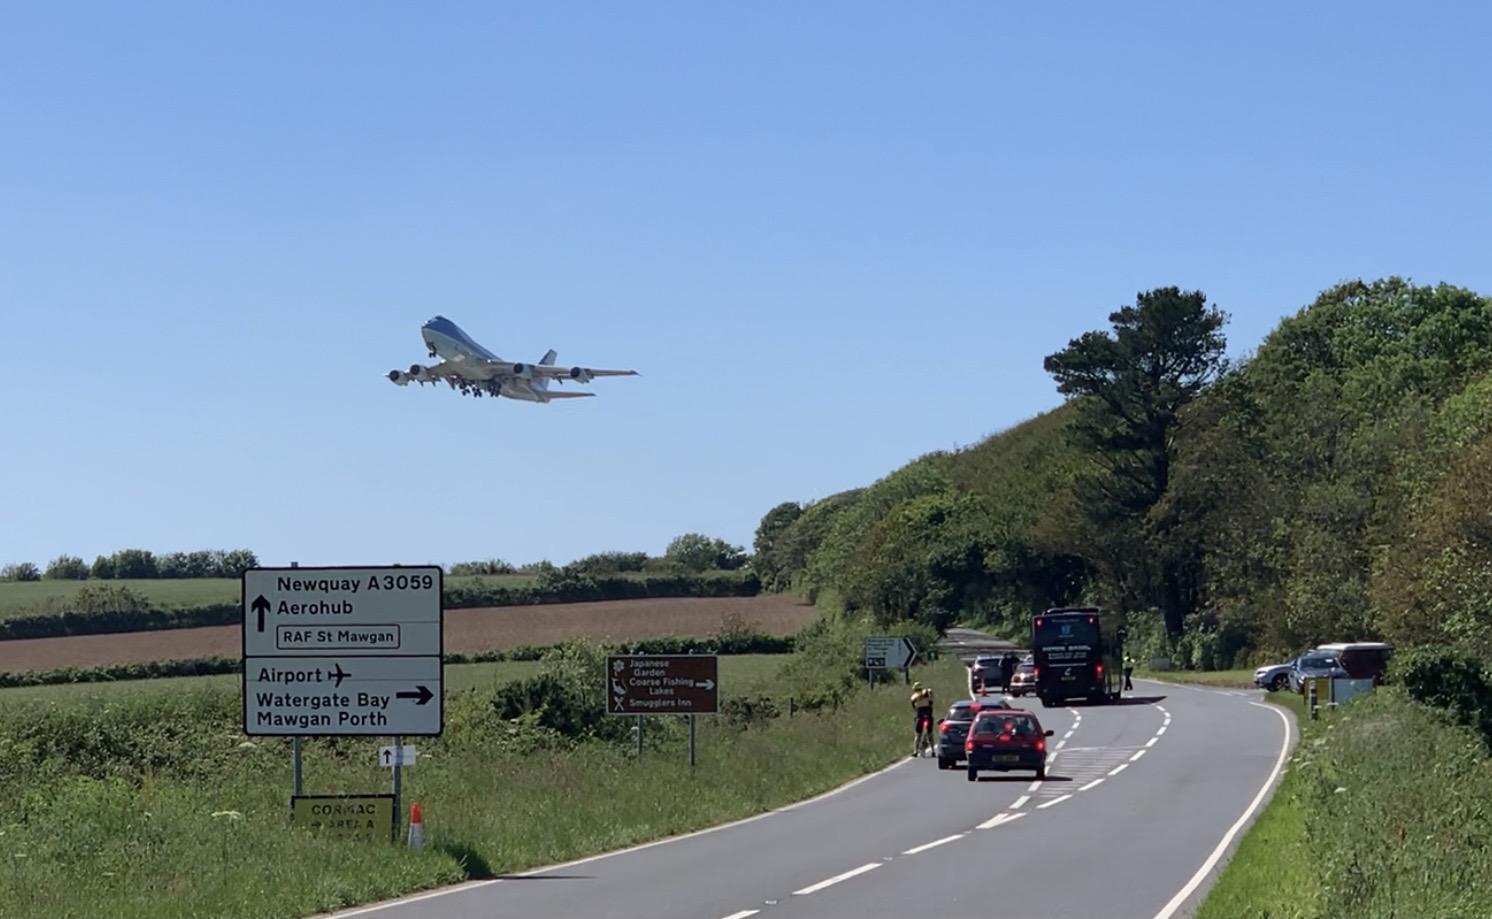 Air Force One departs 2021 G7 Summit in Cornwall